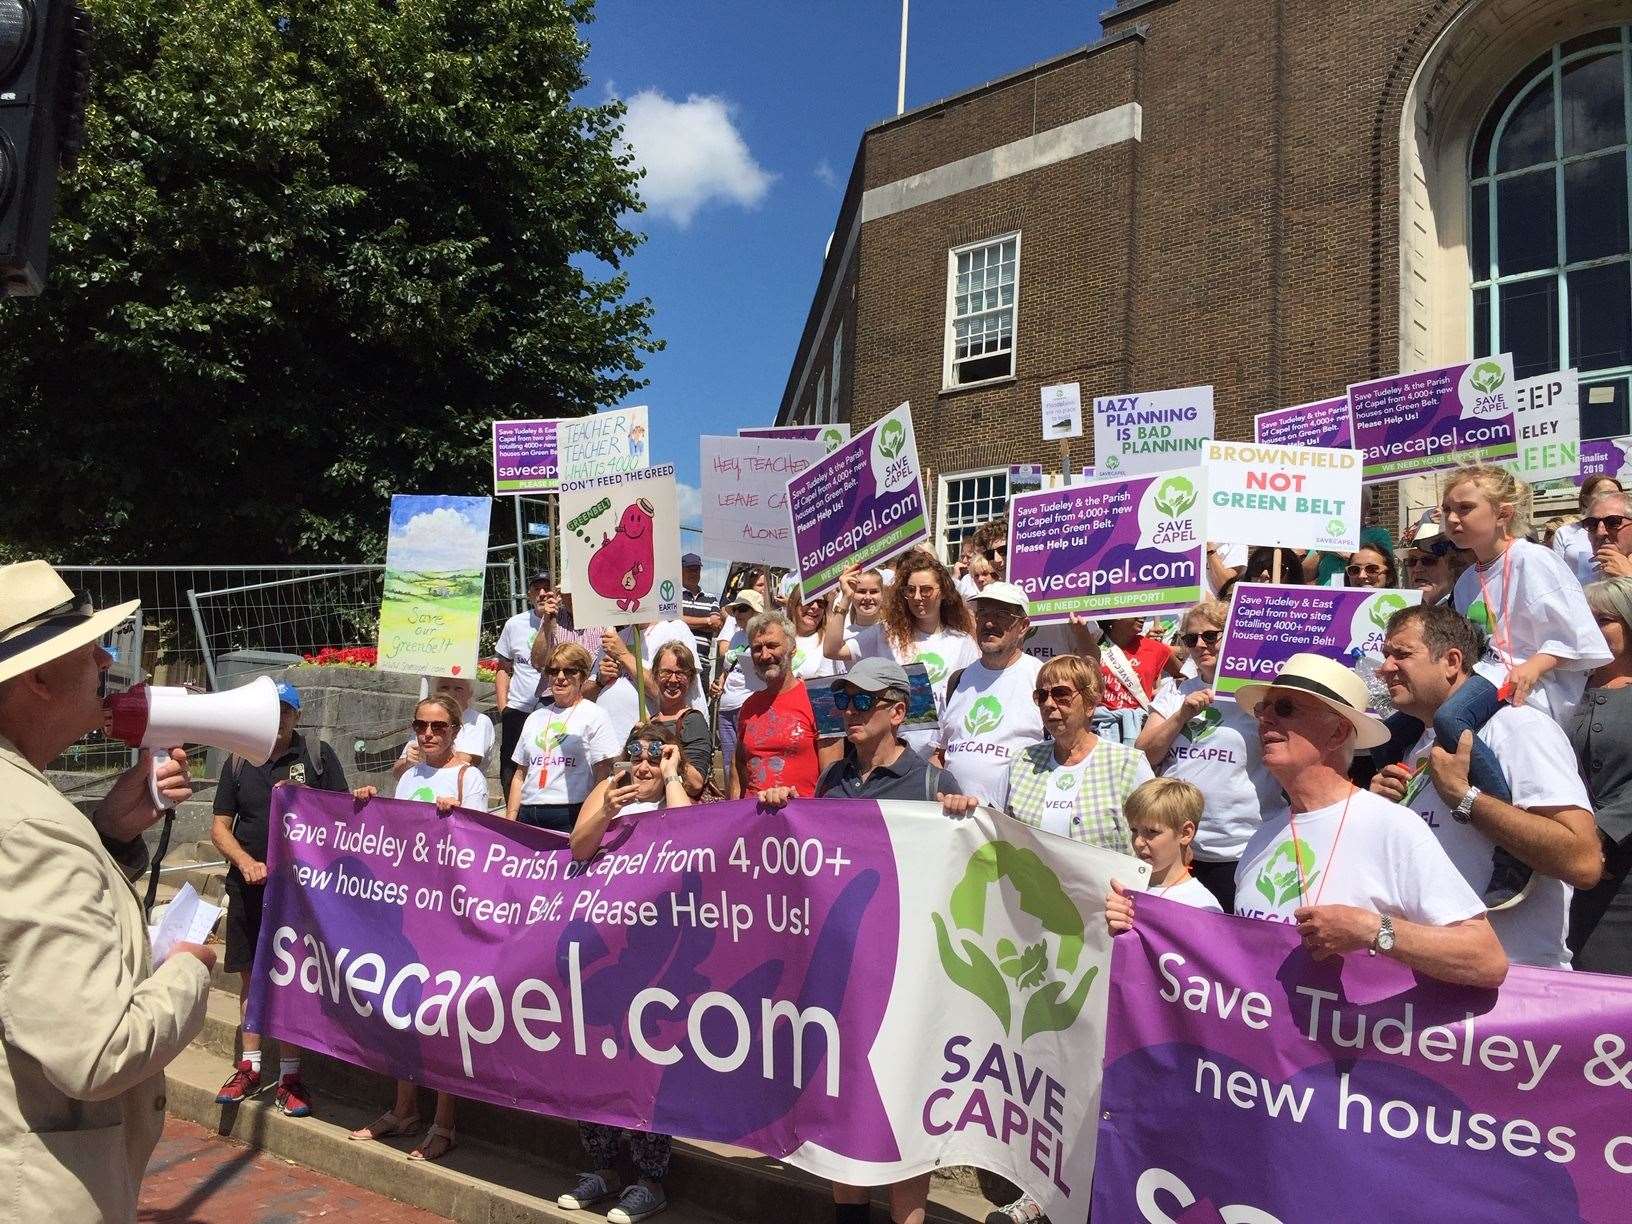 Expect plenty of protests like this on from Save Capel